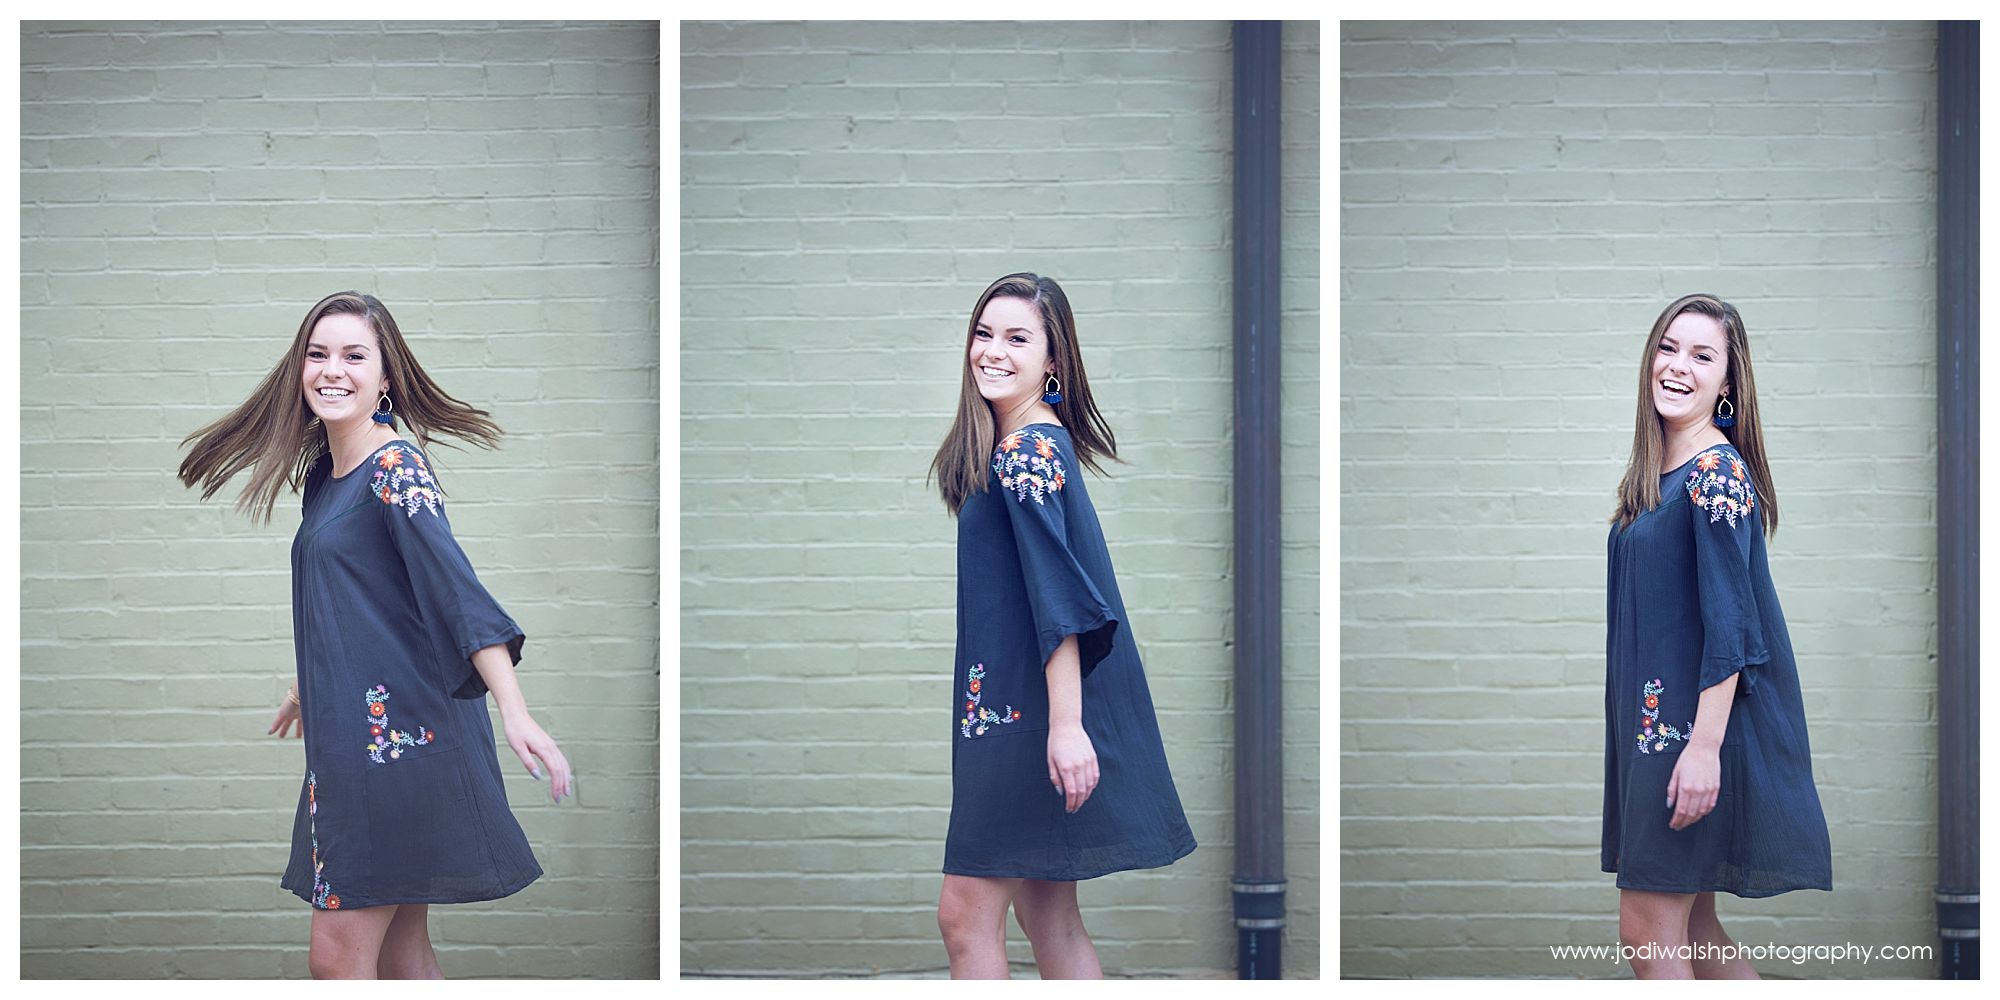 small-town senior portrait with Jodi Walsh Photography in Sewickley.  A trio of images of a senior girl wearing a gray dress, twirling and smiling in front of a cream brick wall.